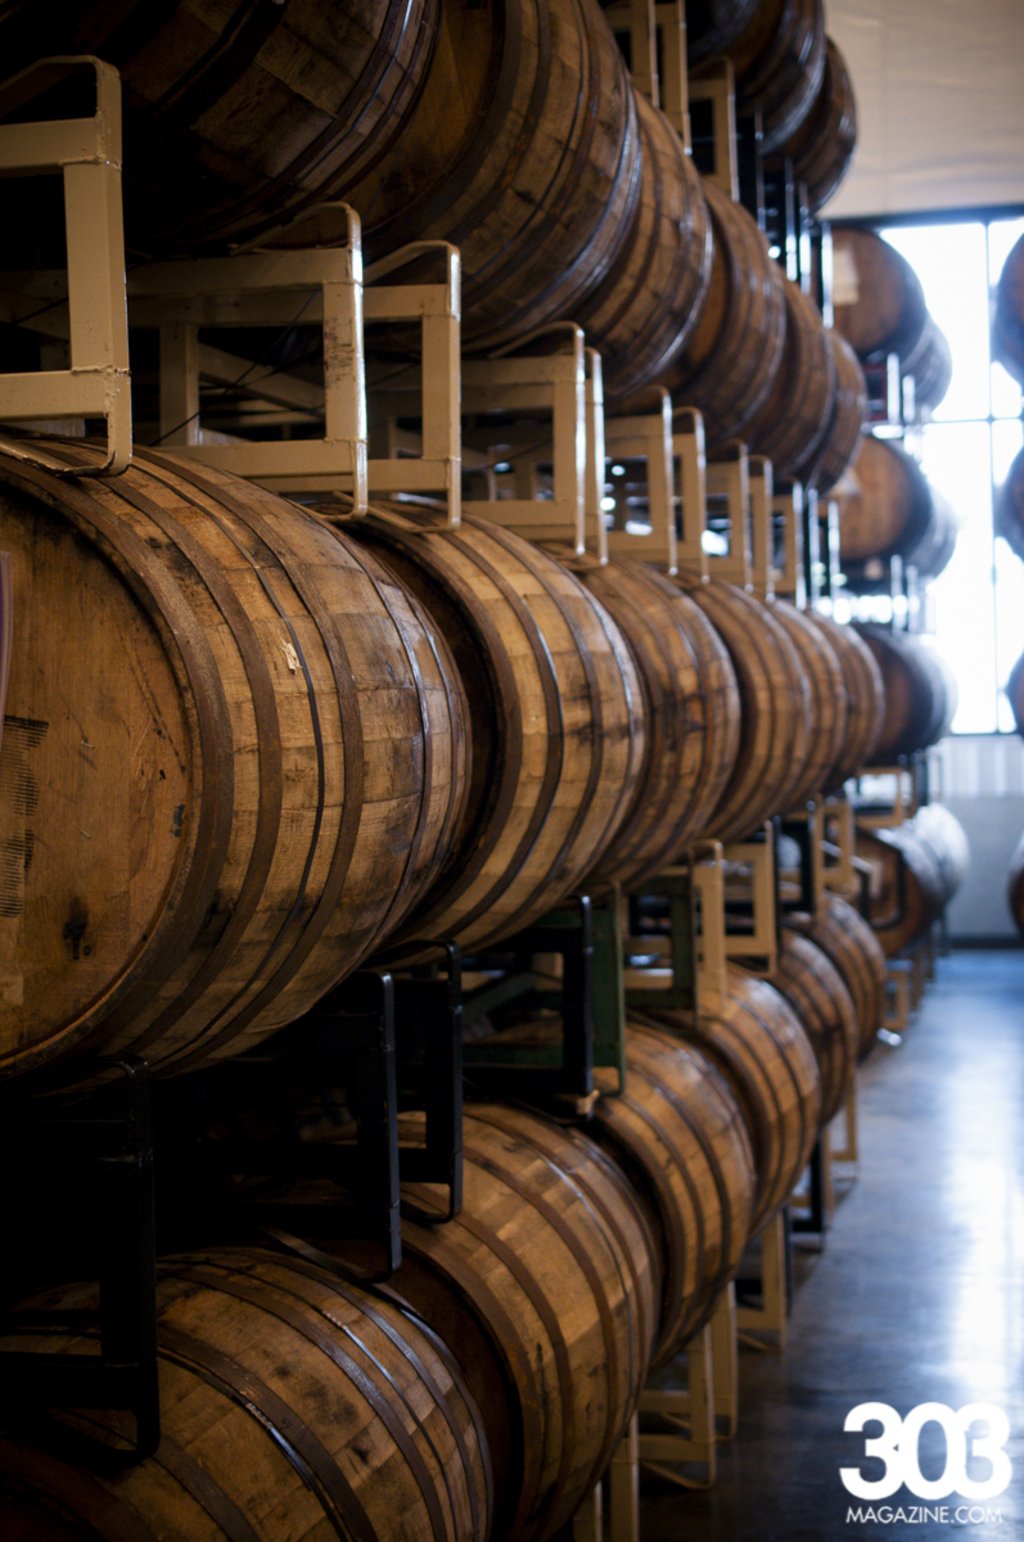 Barrel Room at Great Divide RiNo. Photo by Candace Peterson.